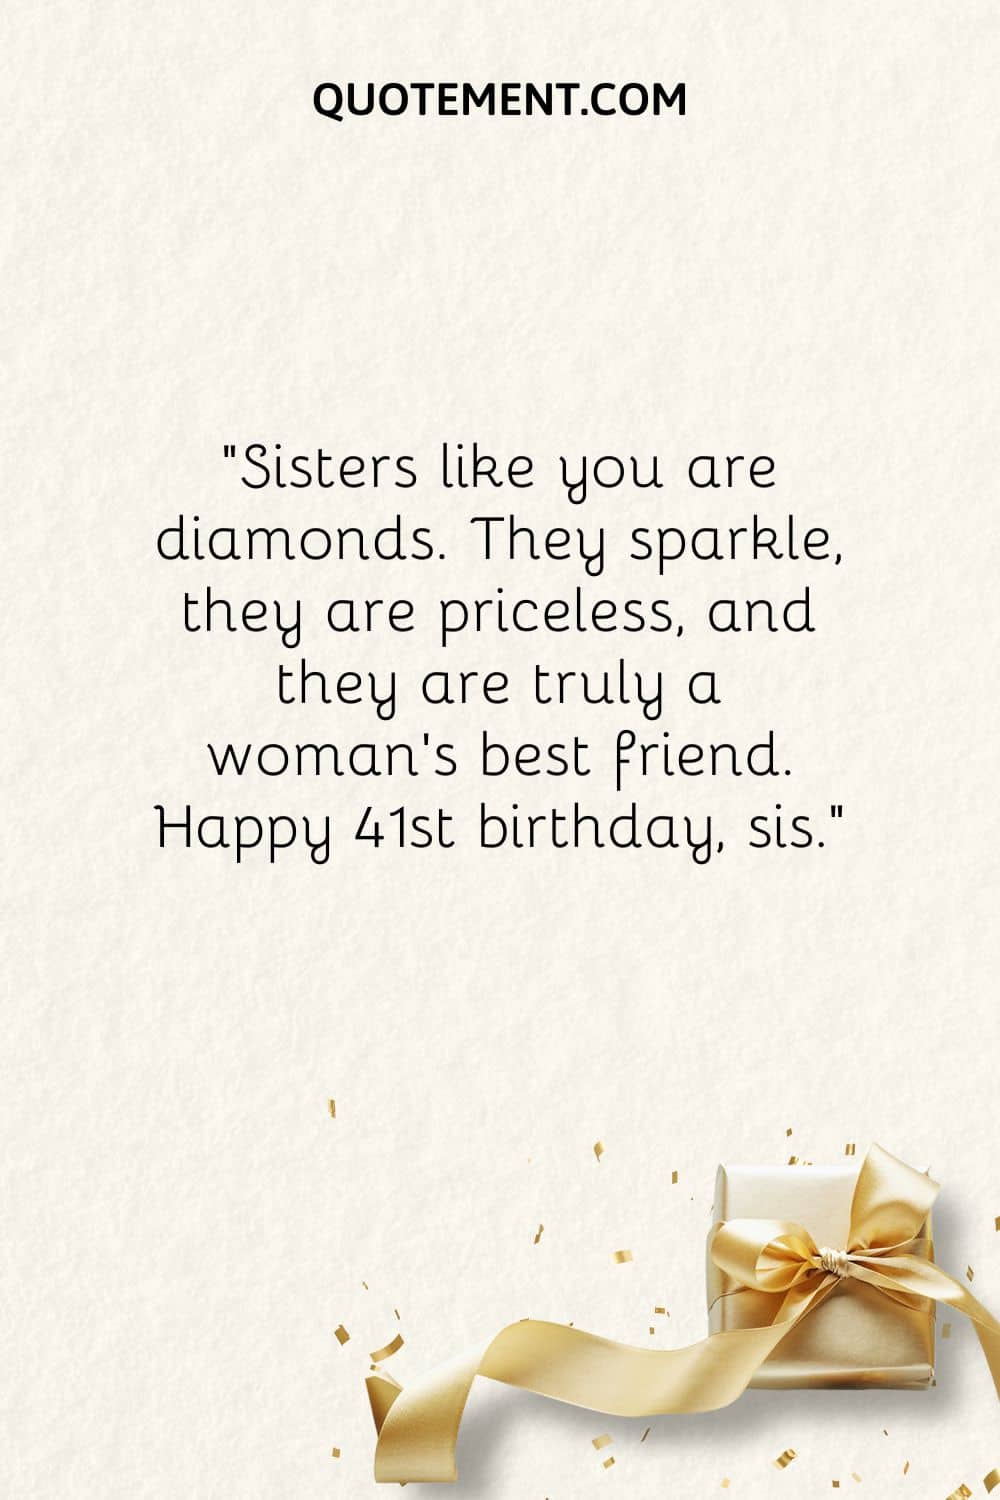 Sisters like you are diamonds. They sparkle, they are priceless, and they are truly a woman’s best friend. Happy 41st birthday, sis